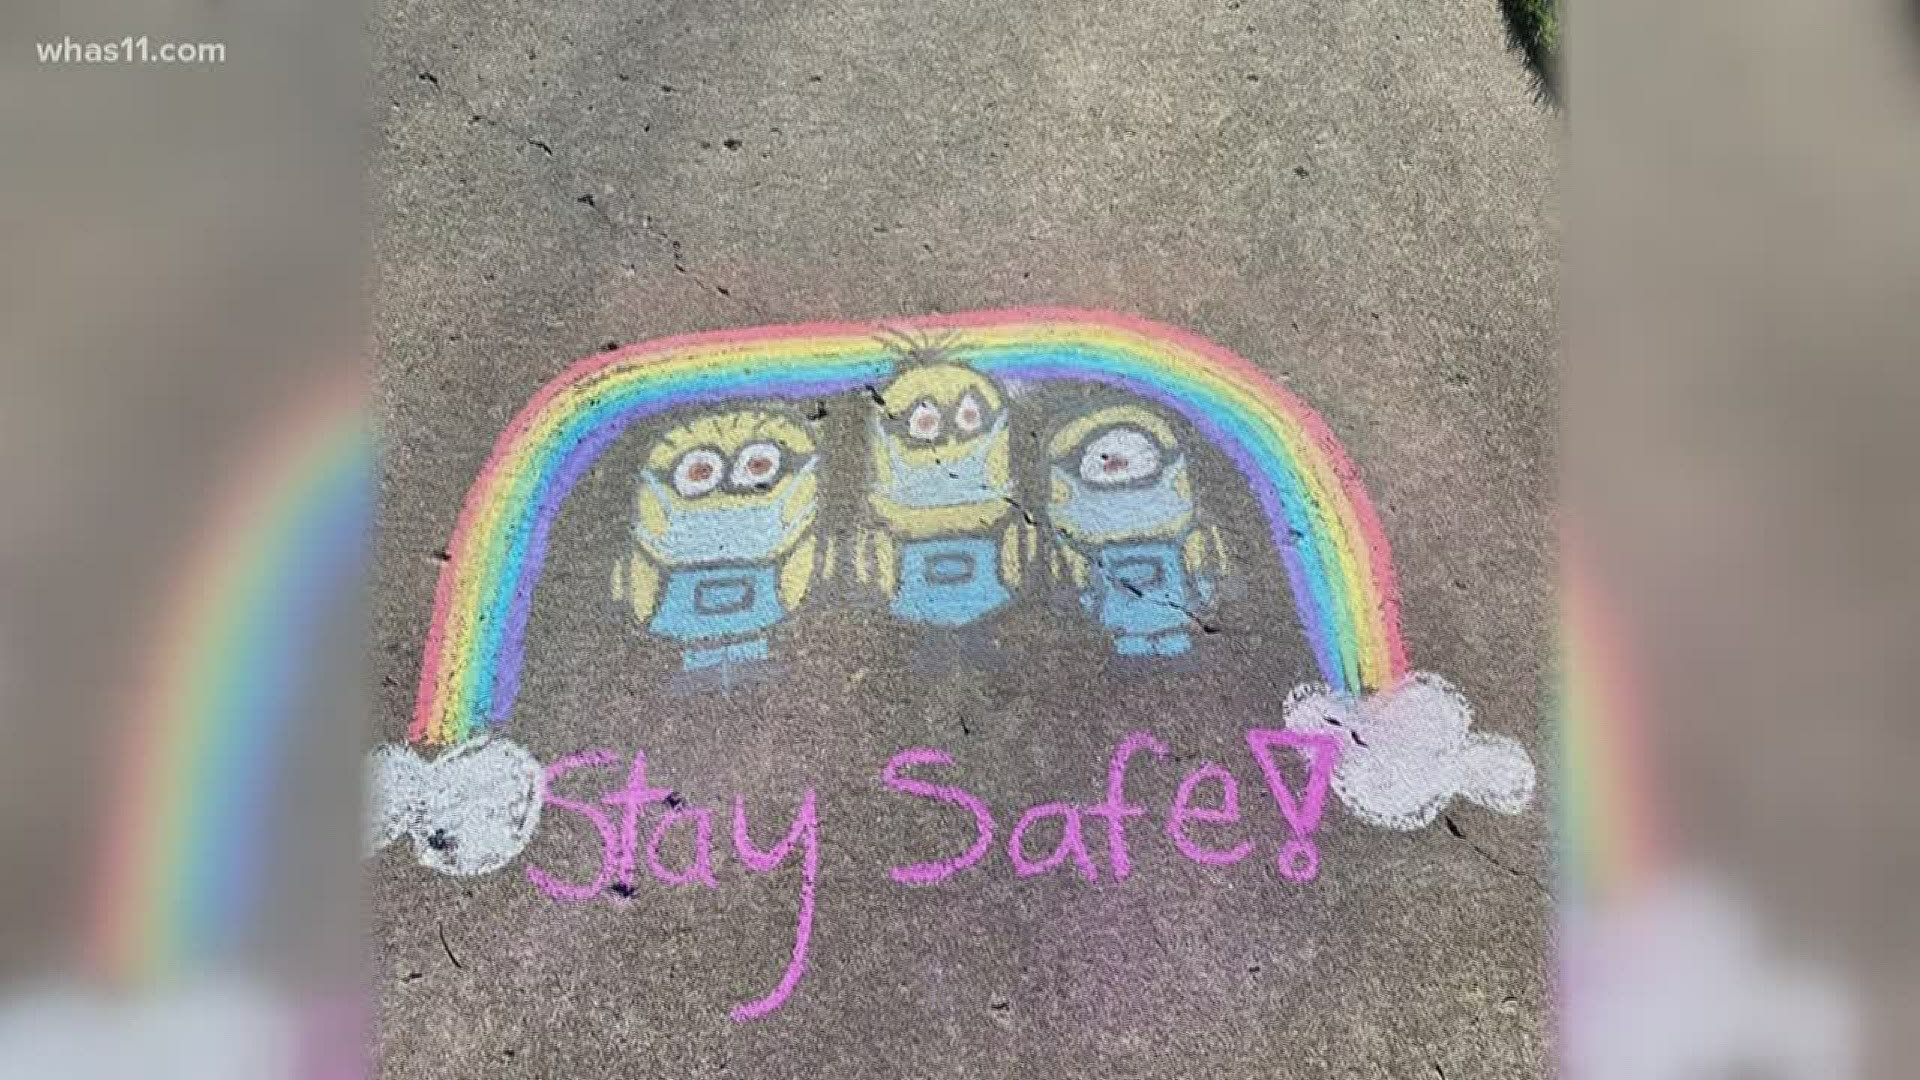 For more information on this chalk art project in Louisville, click the link here: https://bit.ly/2yFmT75